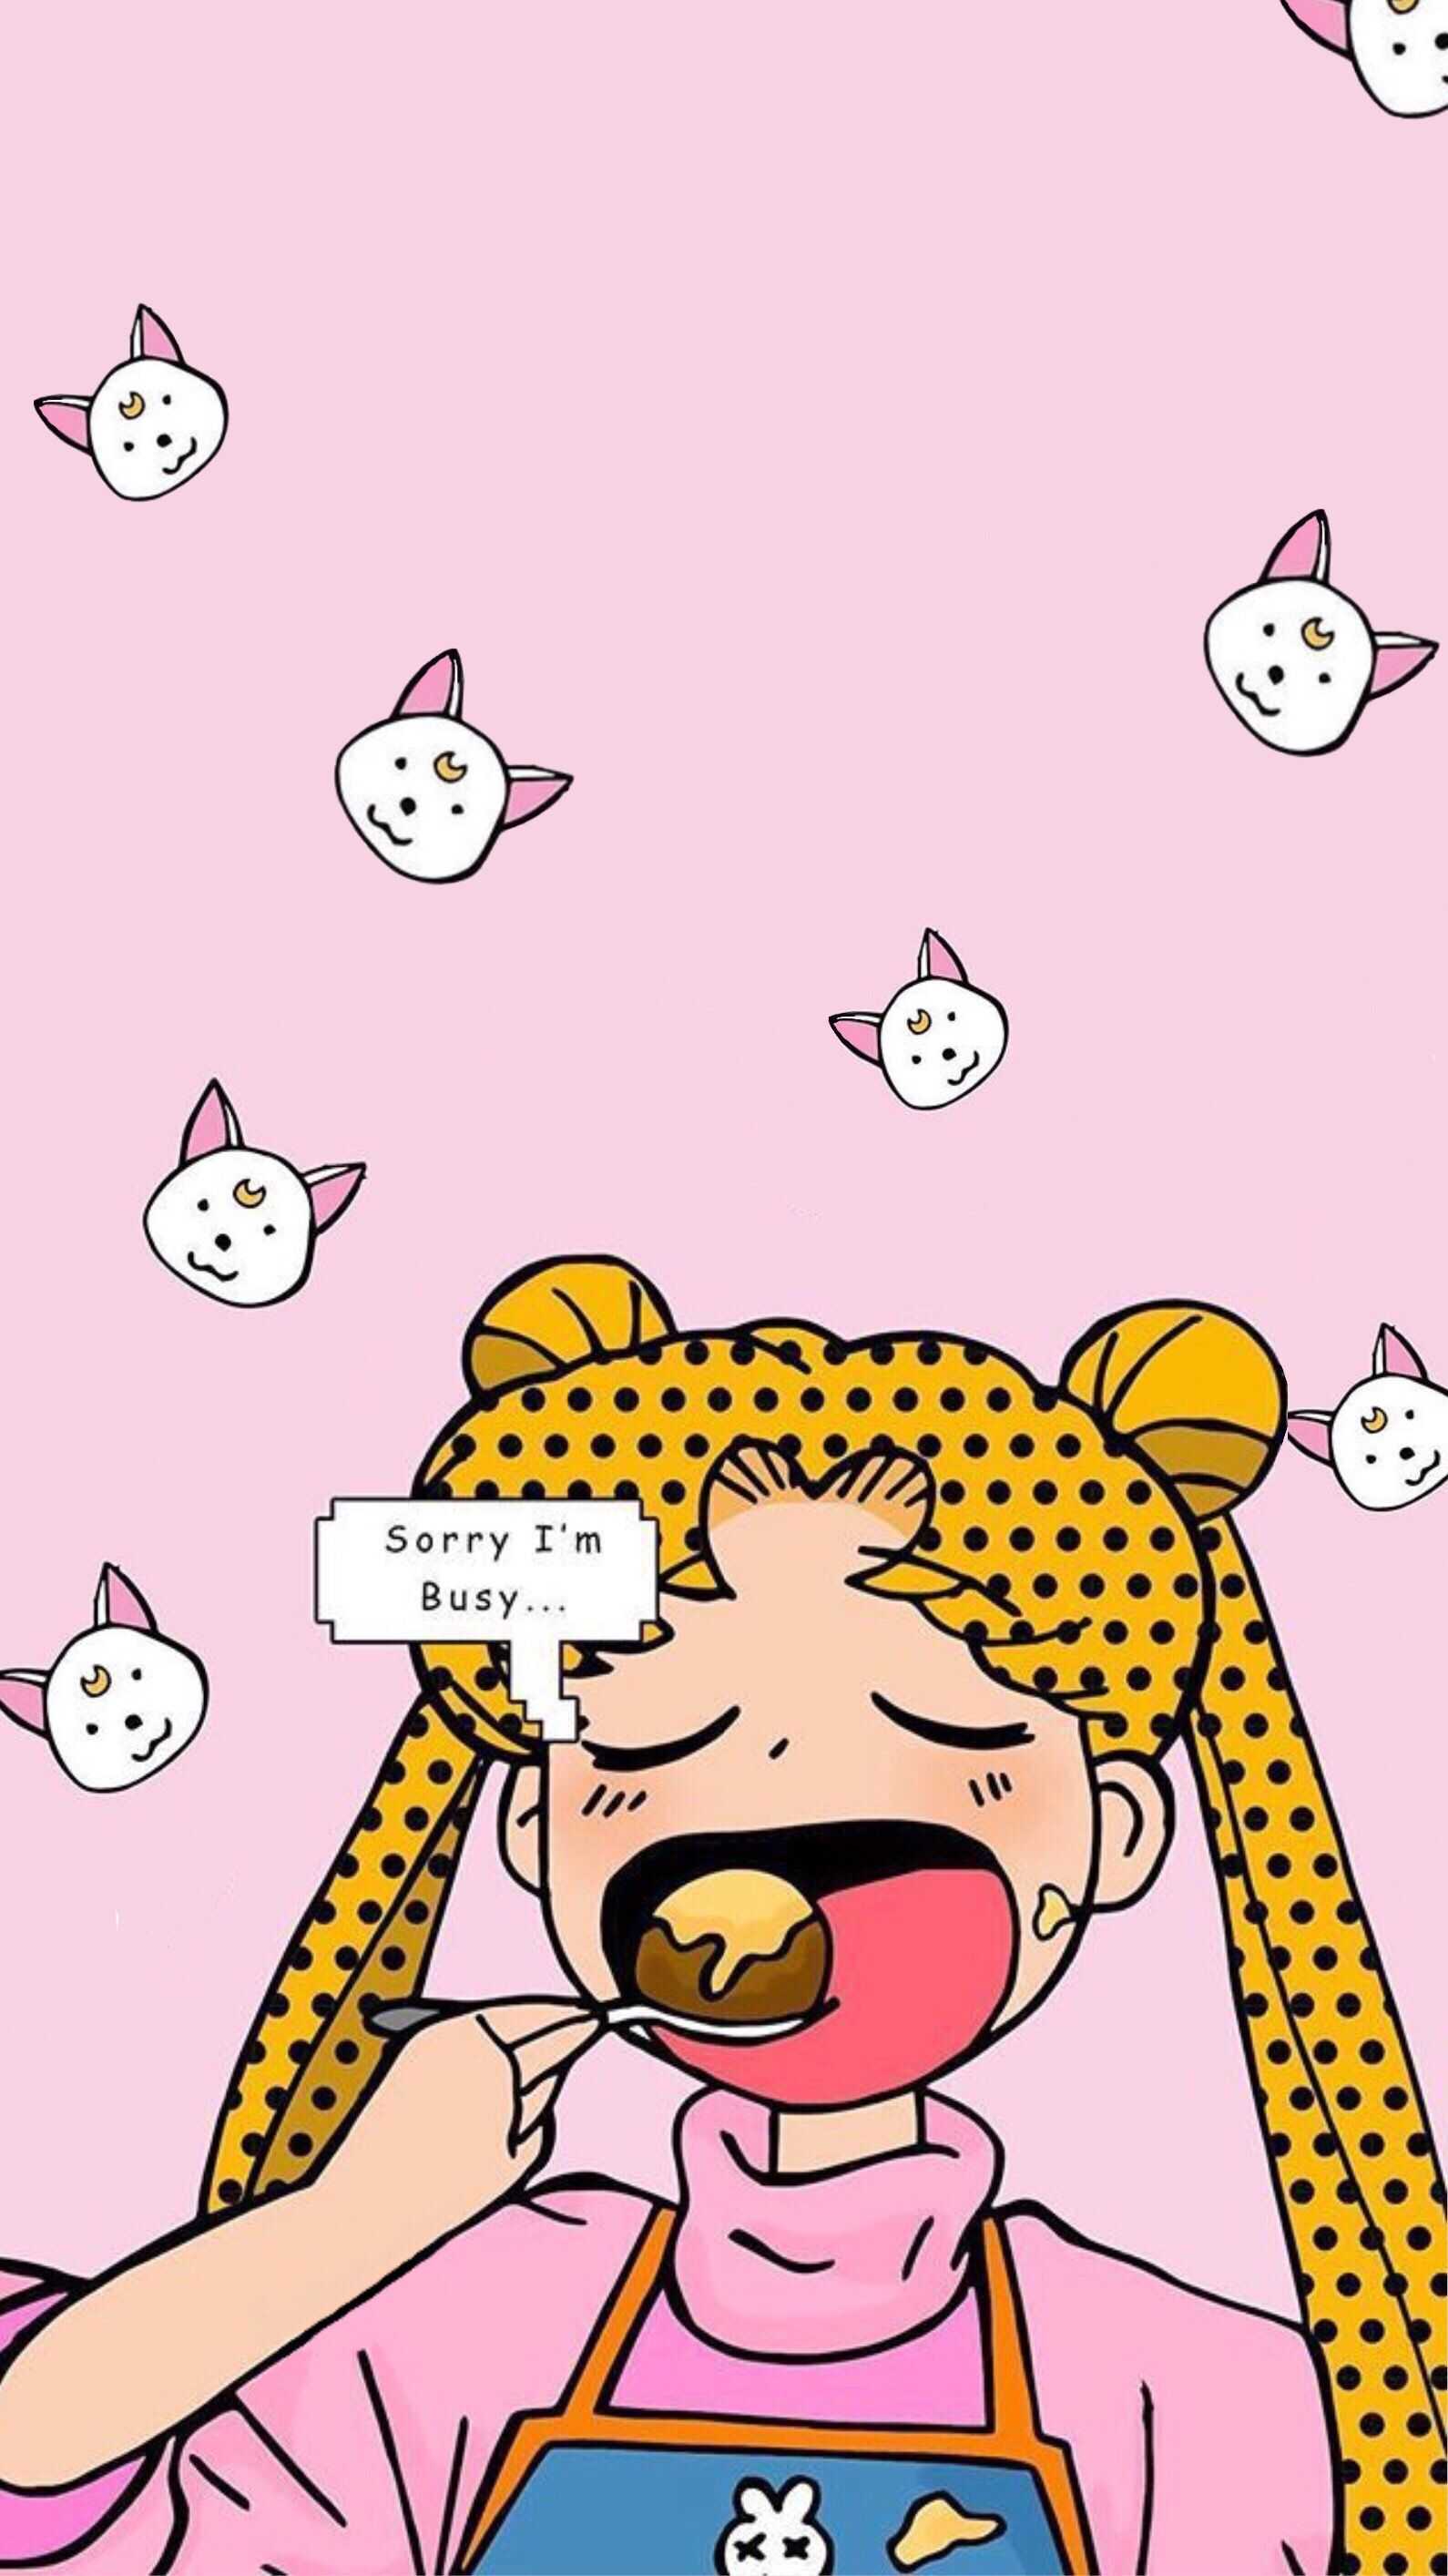 Wallpaper of cartoon girl with a pacifier in her mouth - Sailor Moon